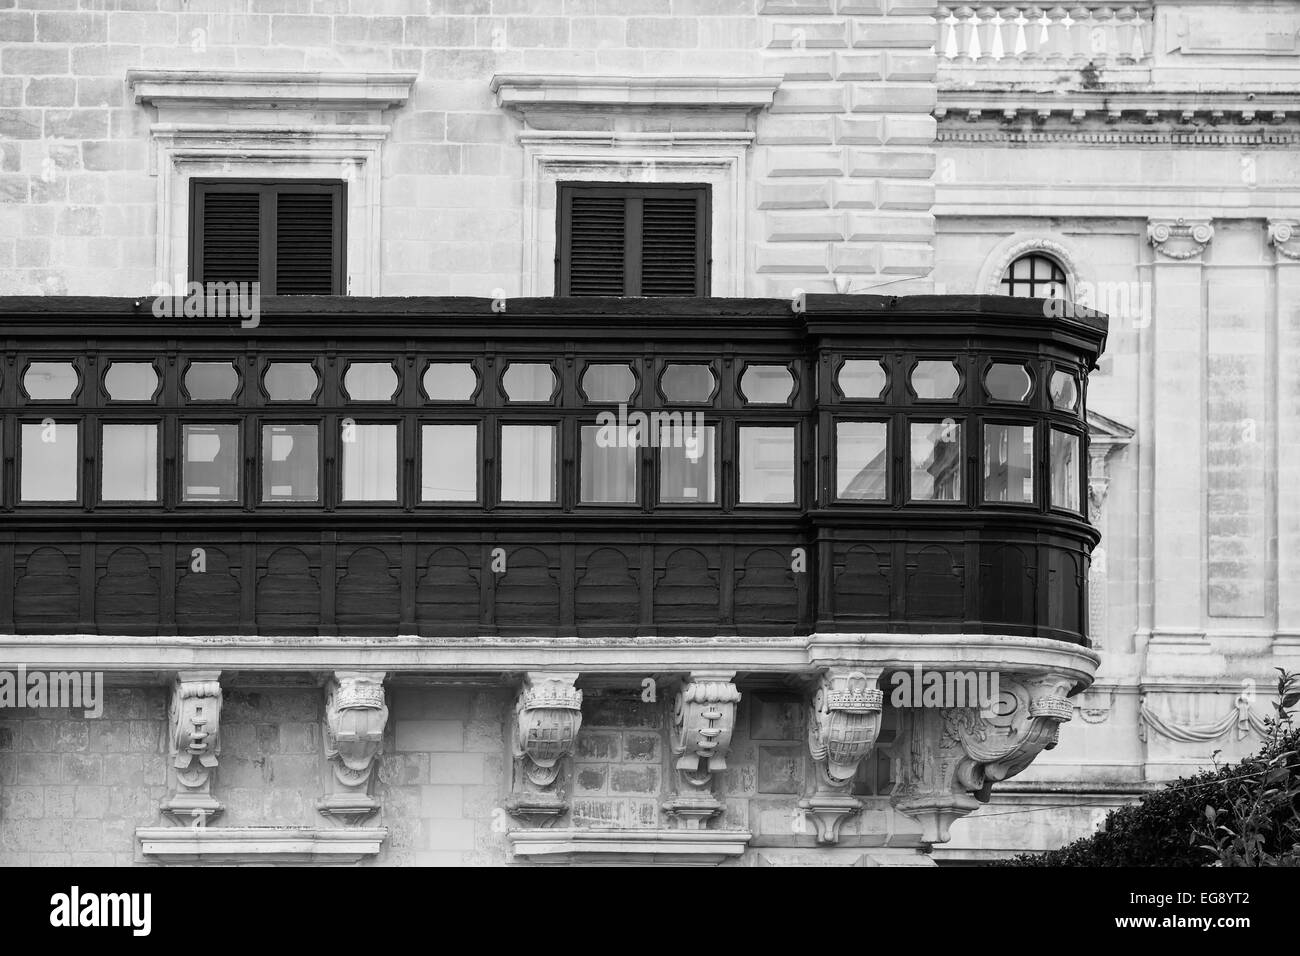 The wooden enclosed balcony of the Grandmaster's Palace in Valletta, Malta. Stock Photo